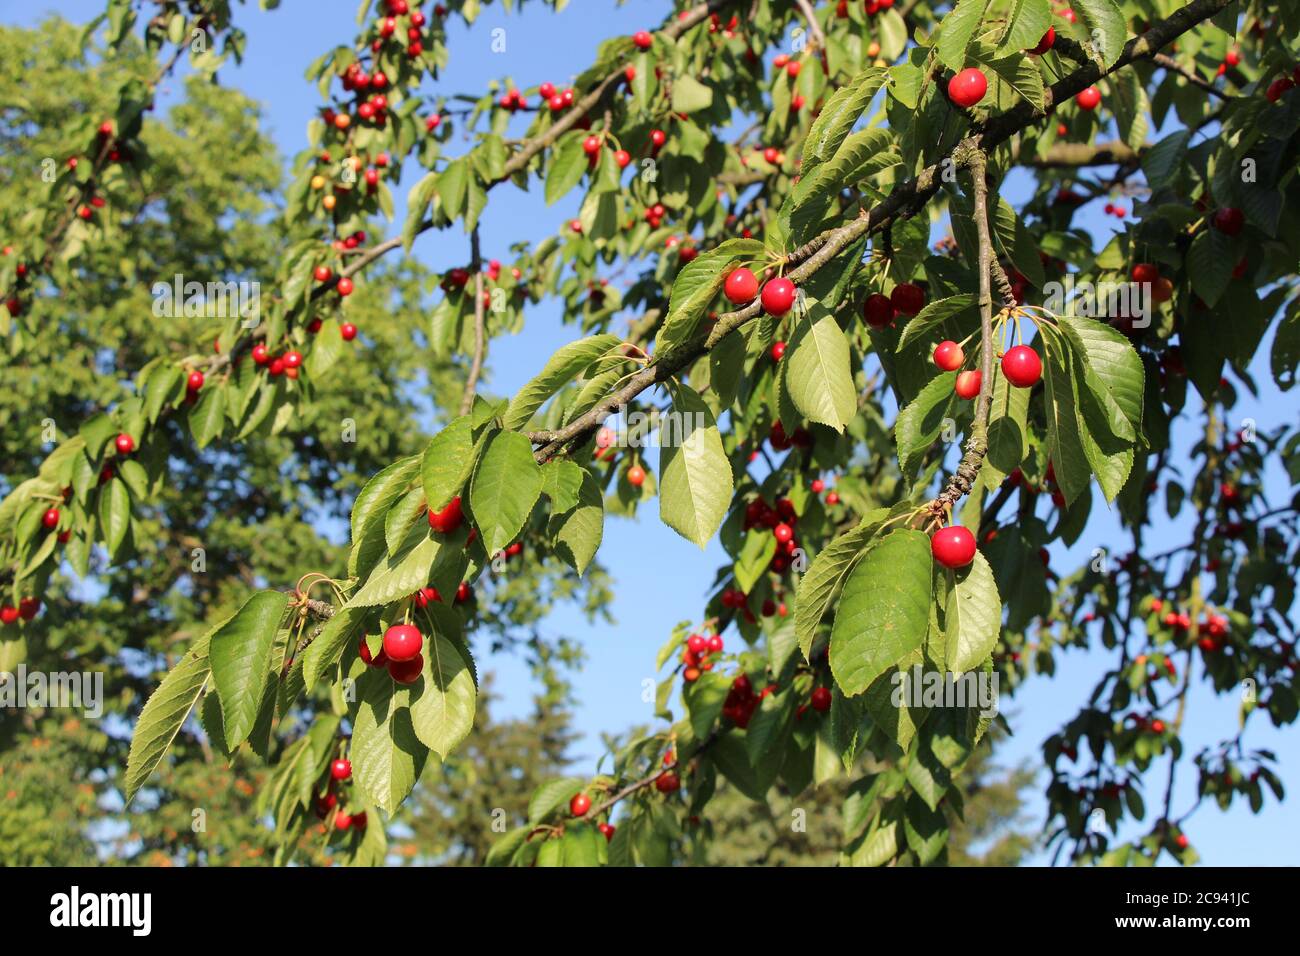 The cherry tree has various yellow cherries and red cherries, in varying  stages of ripening. Stock Photo